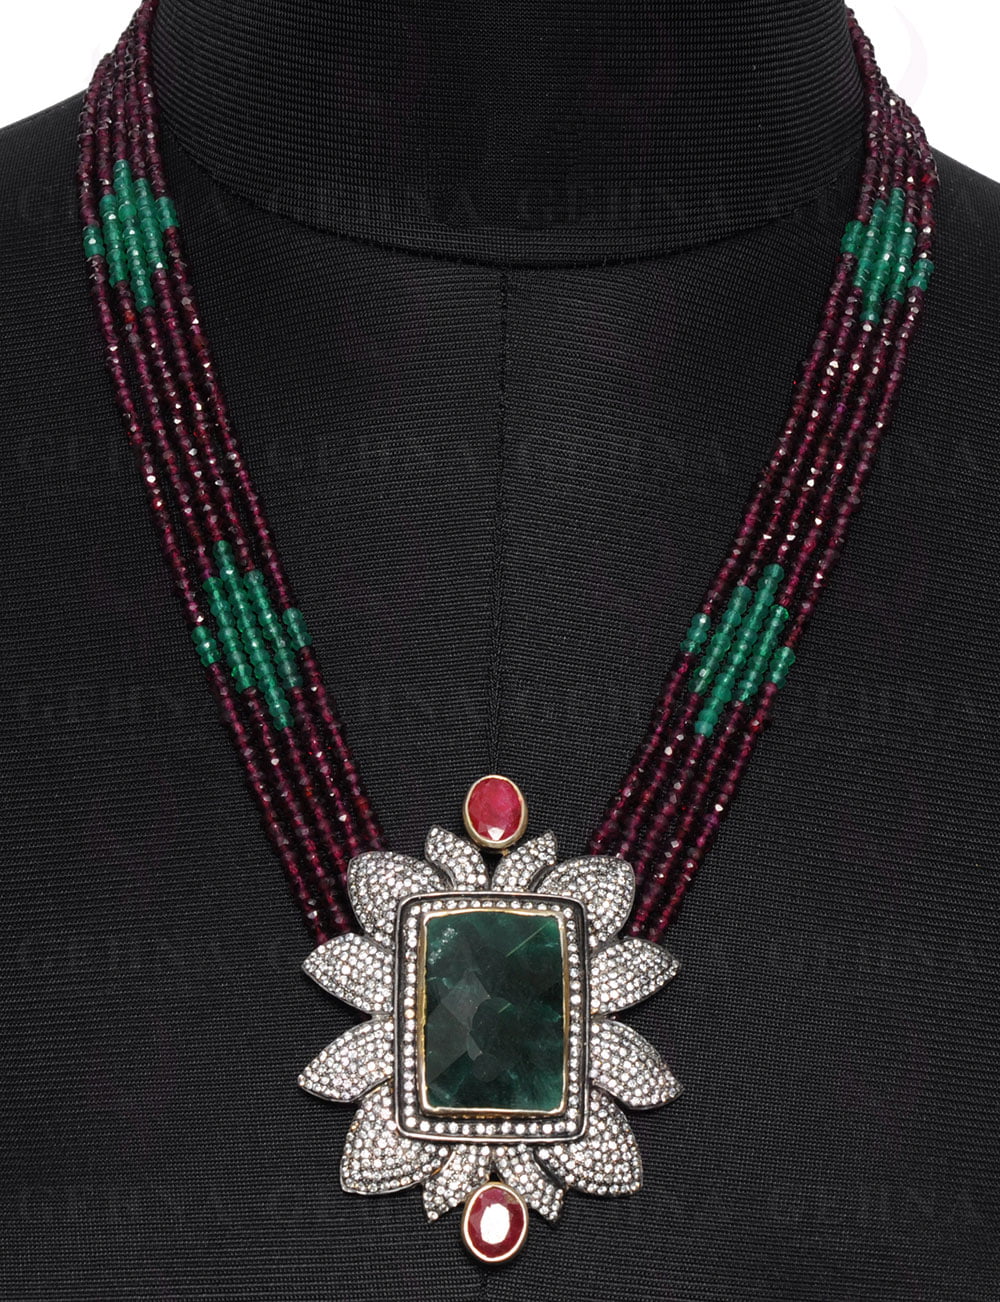 Ruby, Emerald & Garnet Gemstone Necklace with Victorian Pendant NS-1416